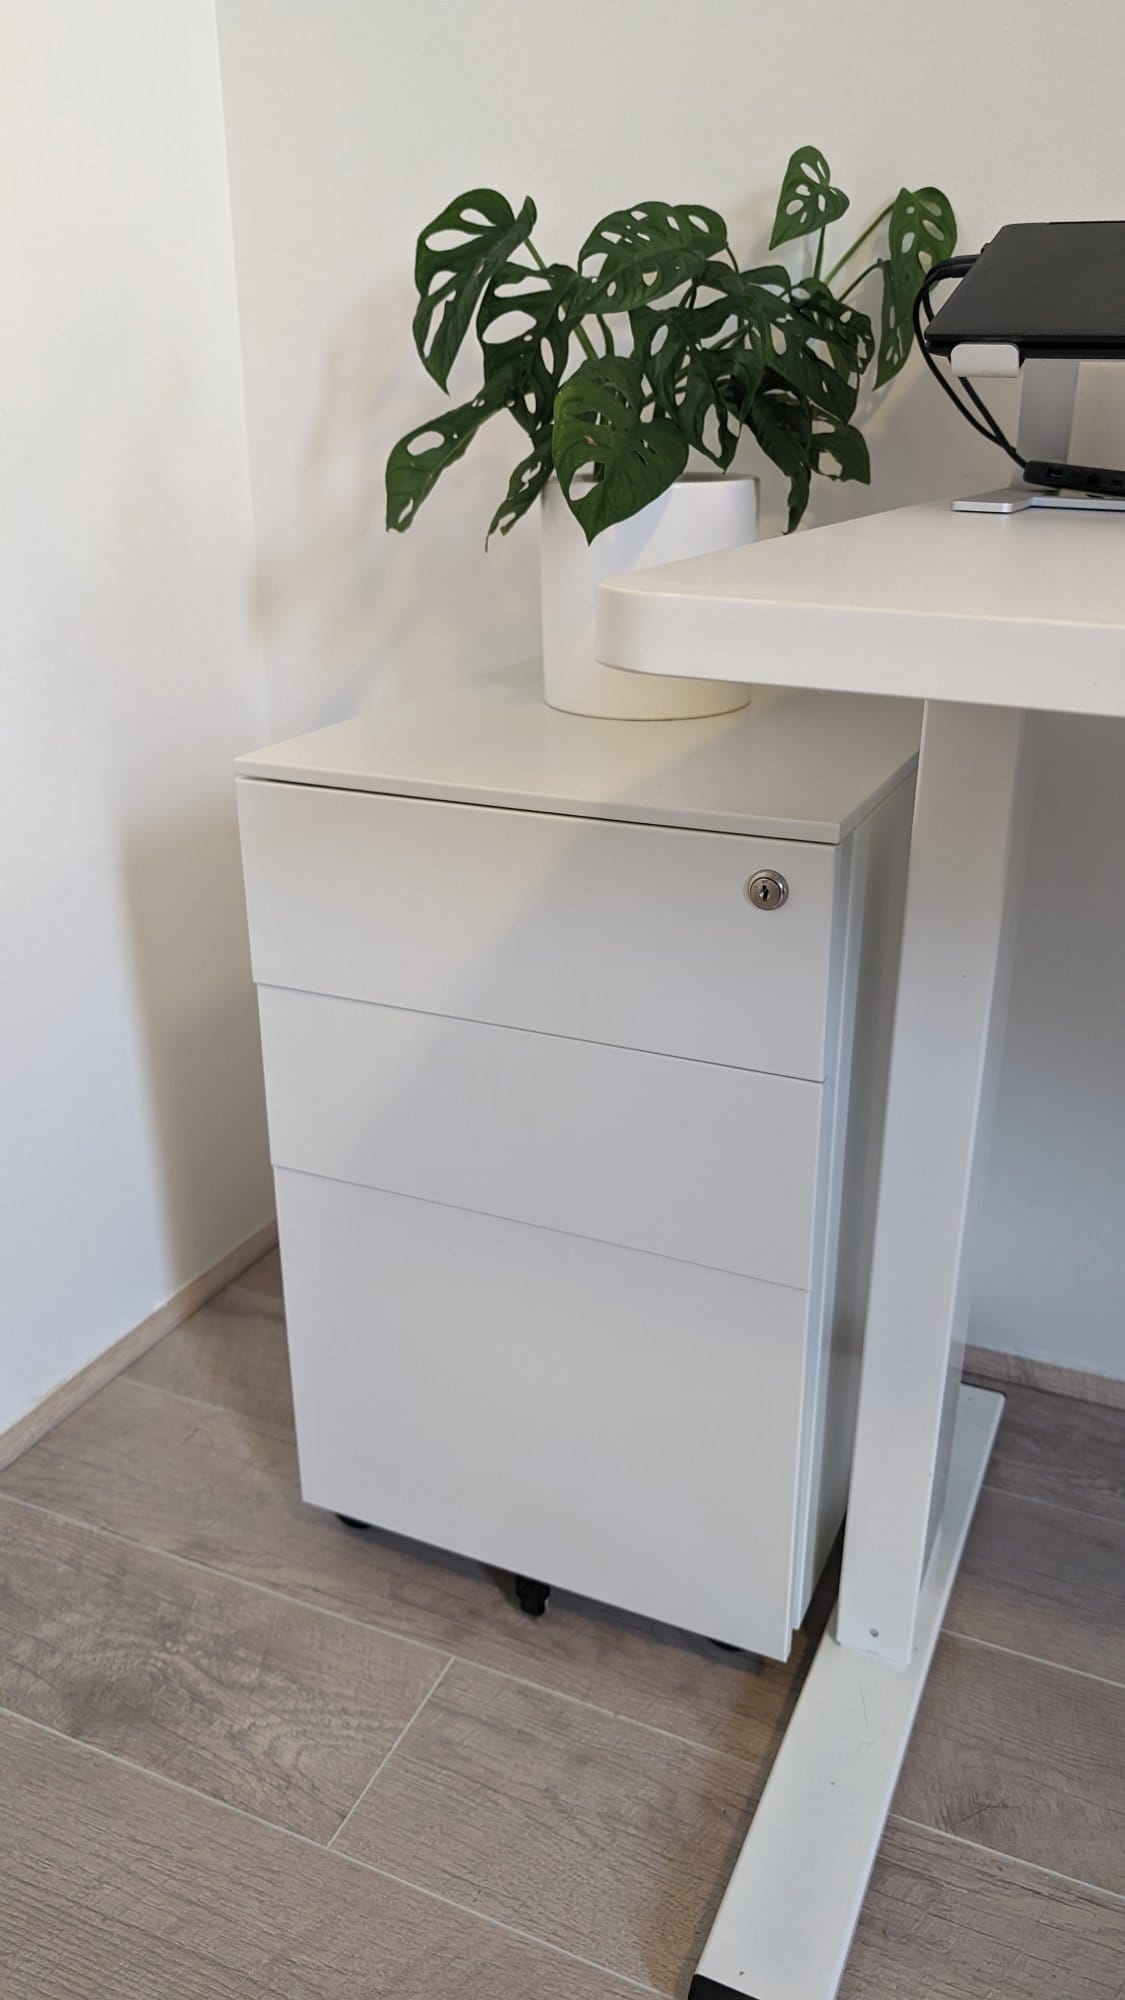 A close-up view of a white office drawer unit next to a standing desk with a portion of a monstera plant visible on the left